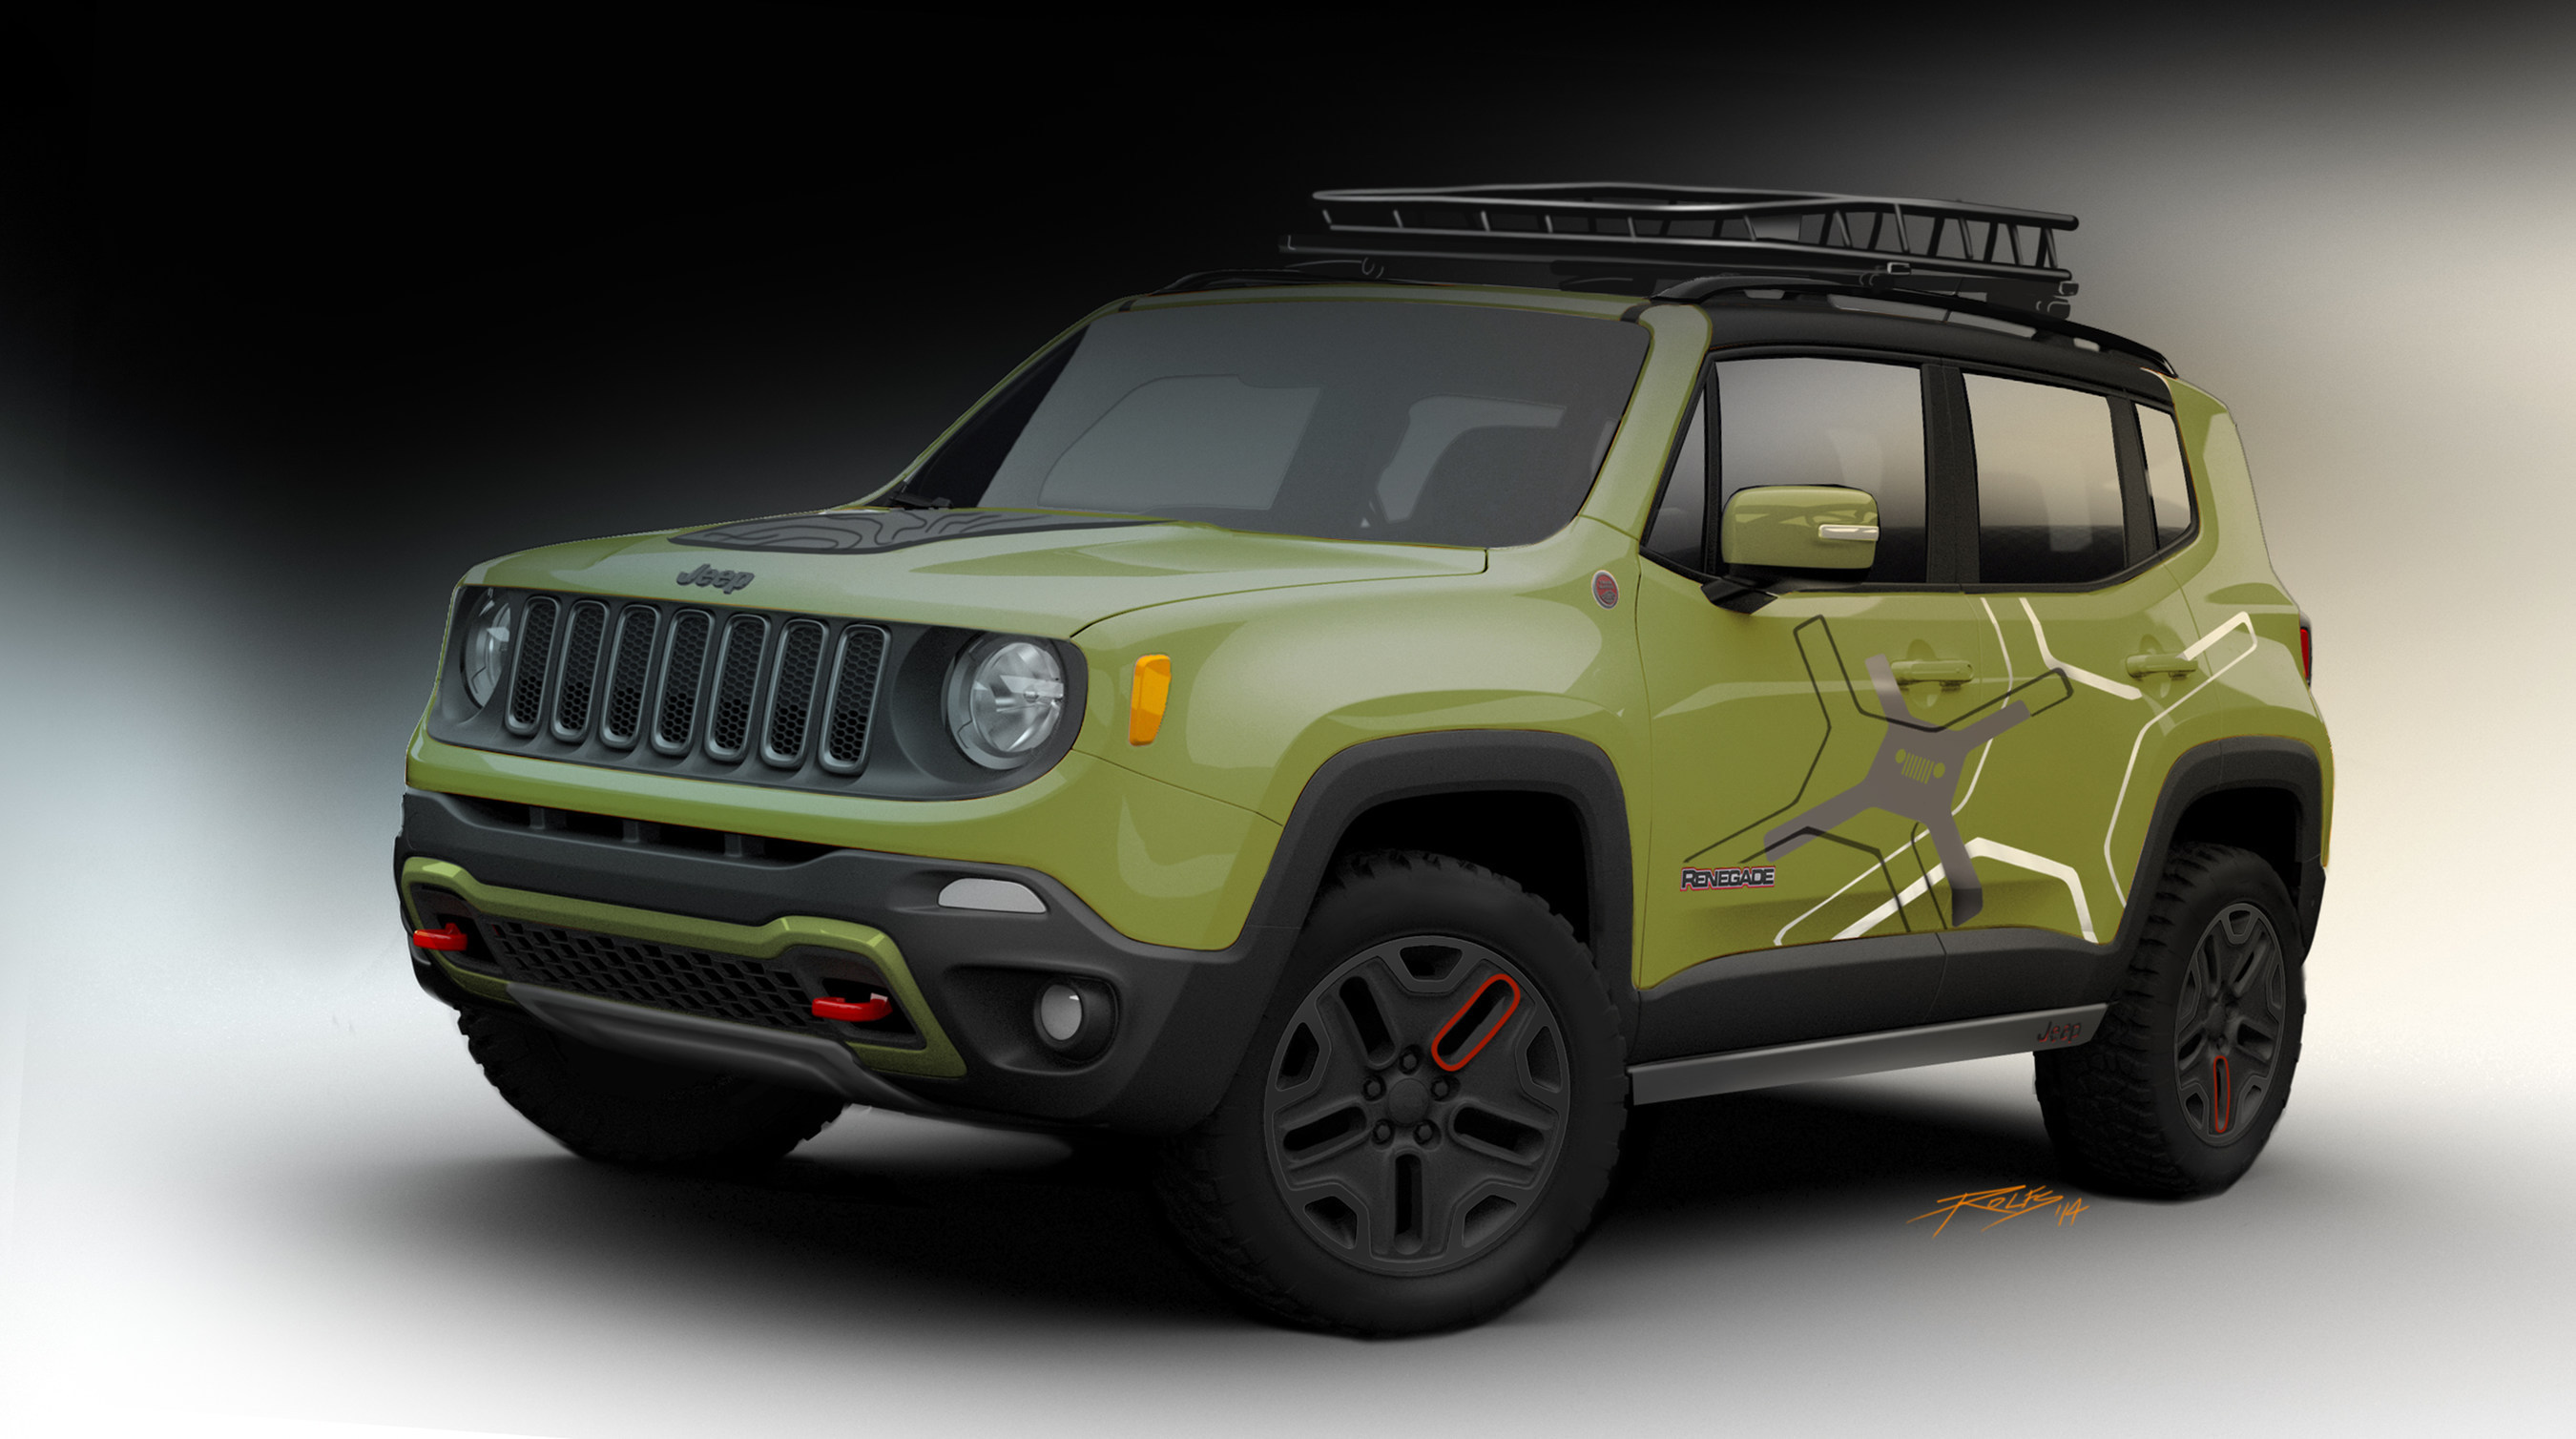 An off-road Mopar-equipped Jeep(R) Renegade to be displayed at the 2015 NAIAS in Detroit